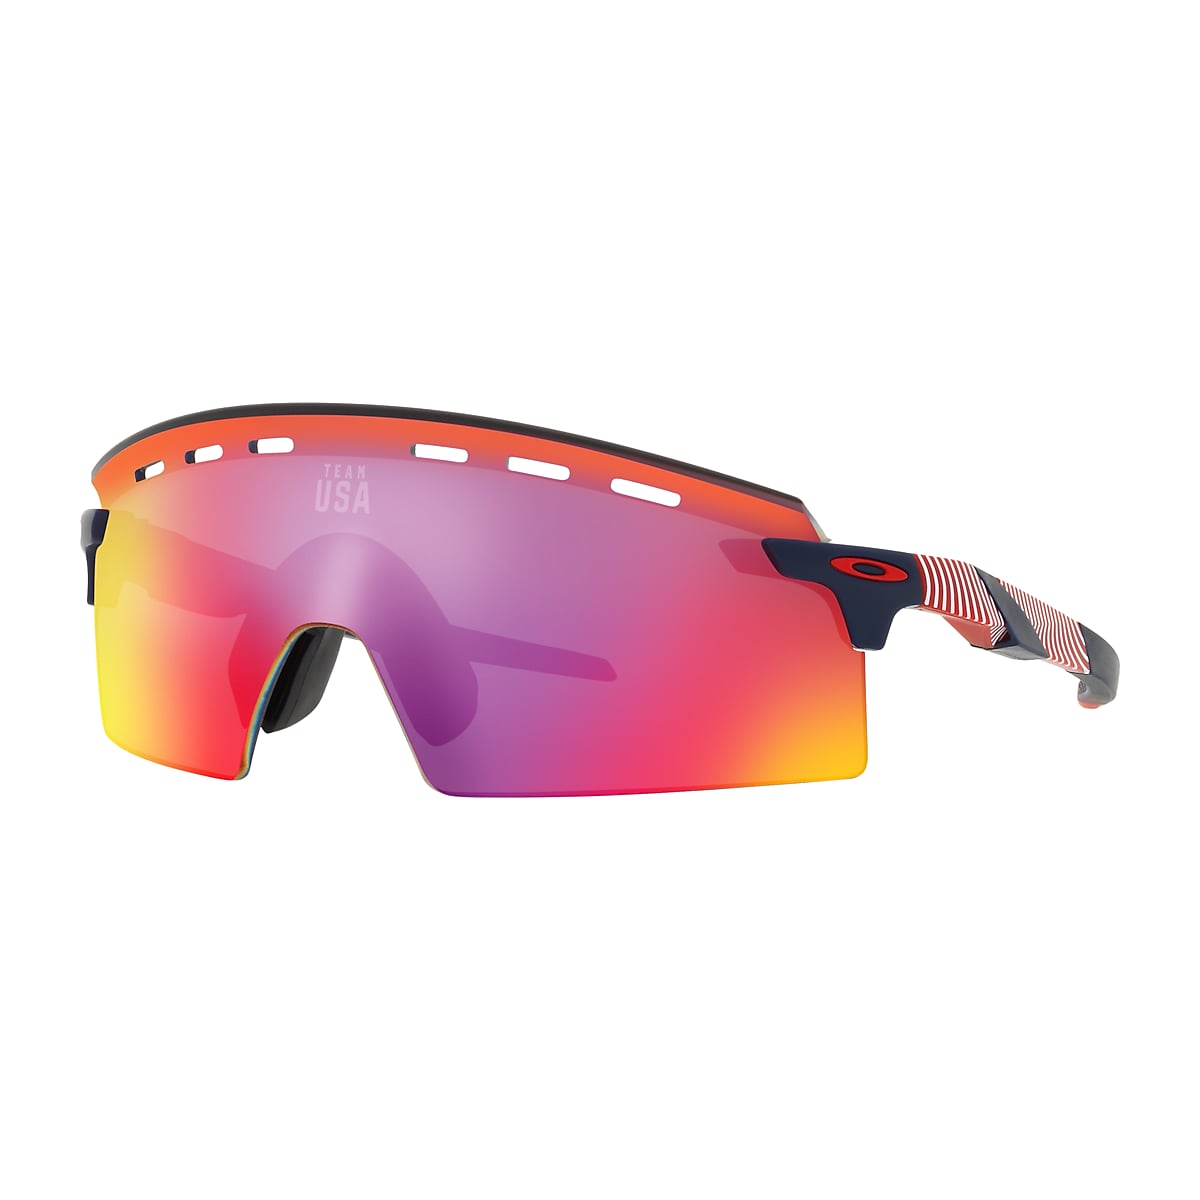 Oakley Vault, 4401 N Interstate 35 Round Rock, TX  Men's and Women's  Sunglasses, Goggles, & Apparel